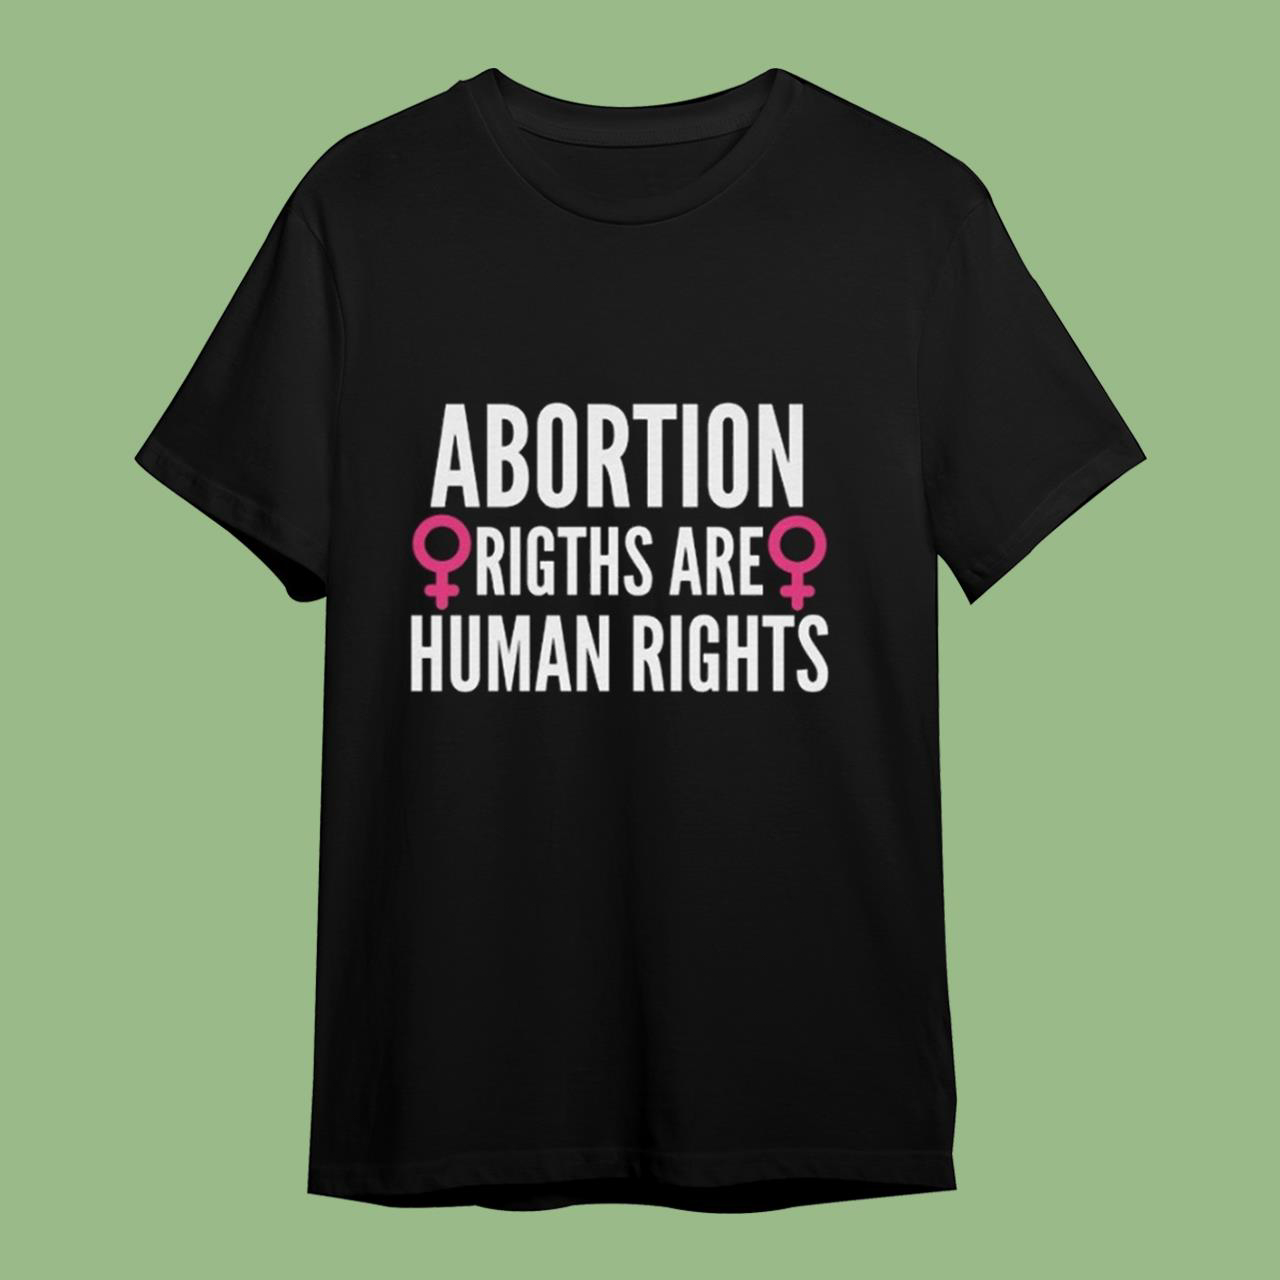 Abortion Rights Are Human Rights Tee Shirt